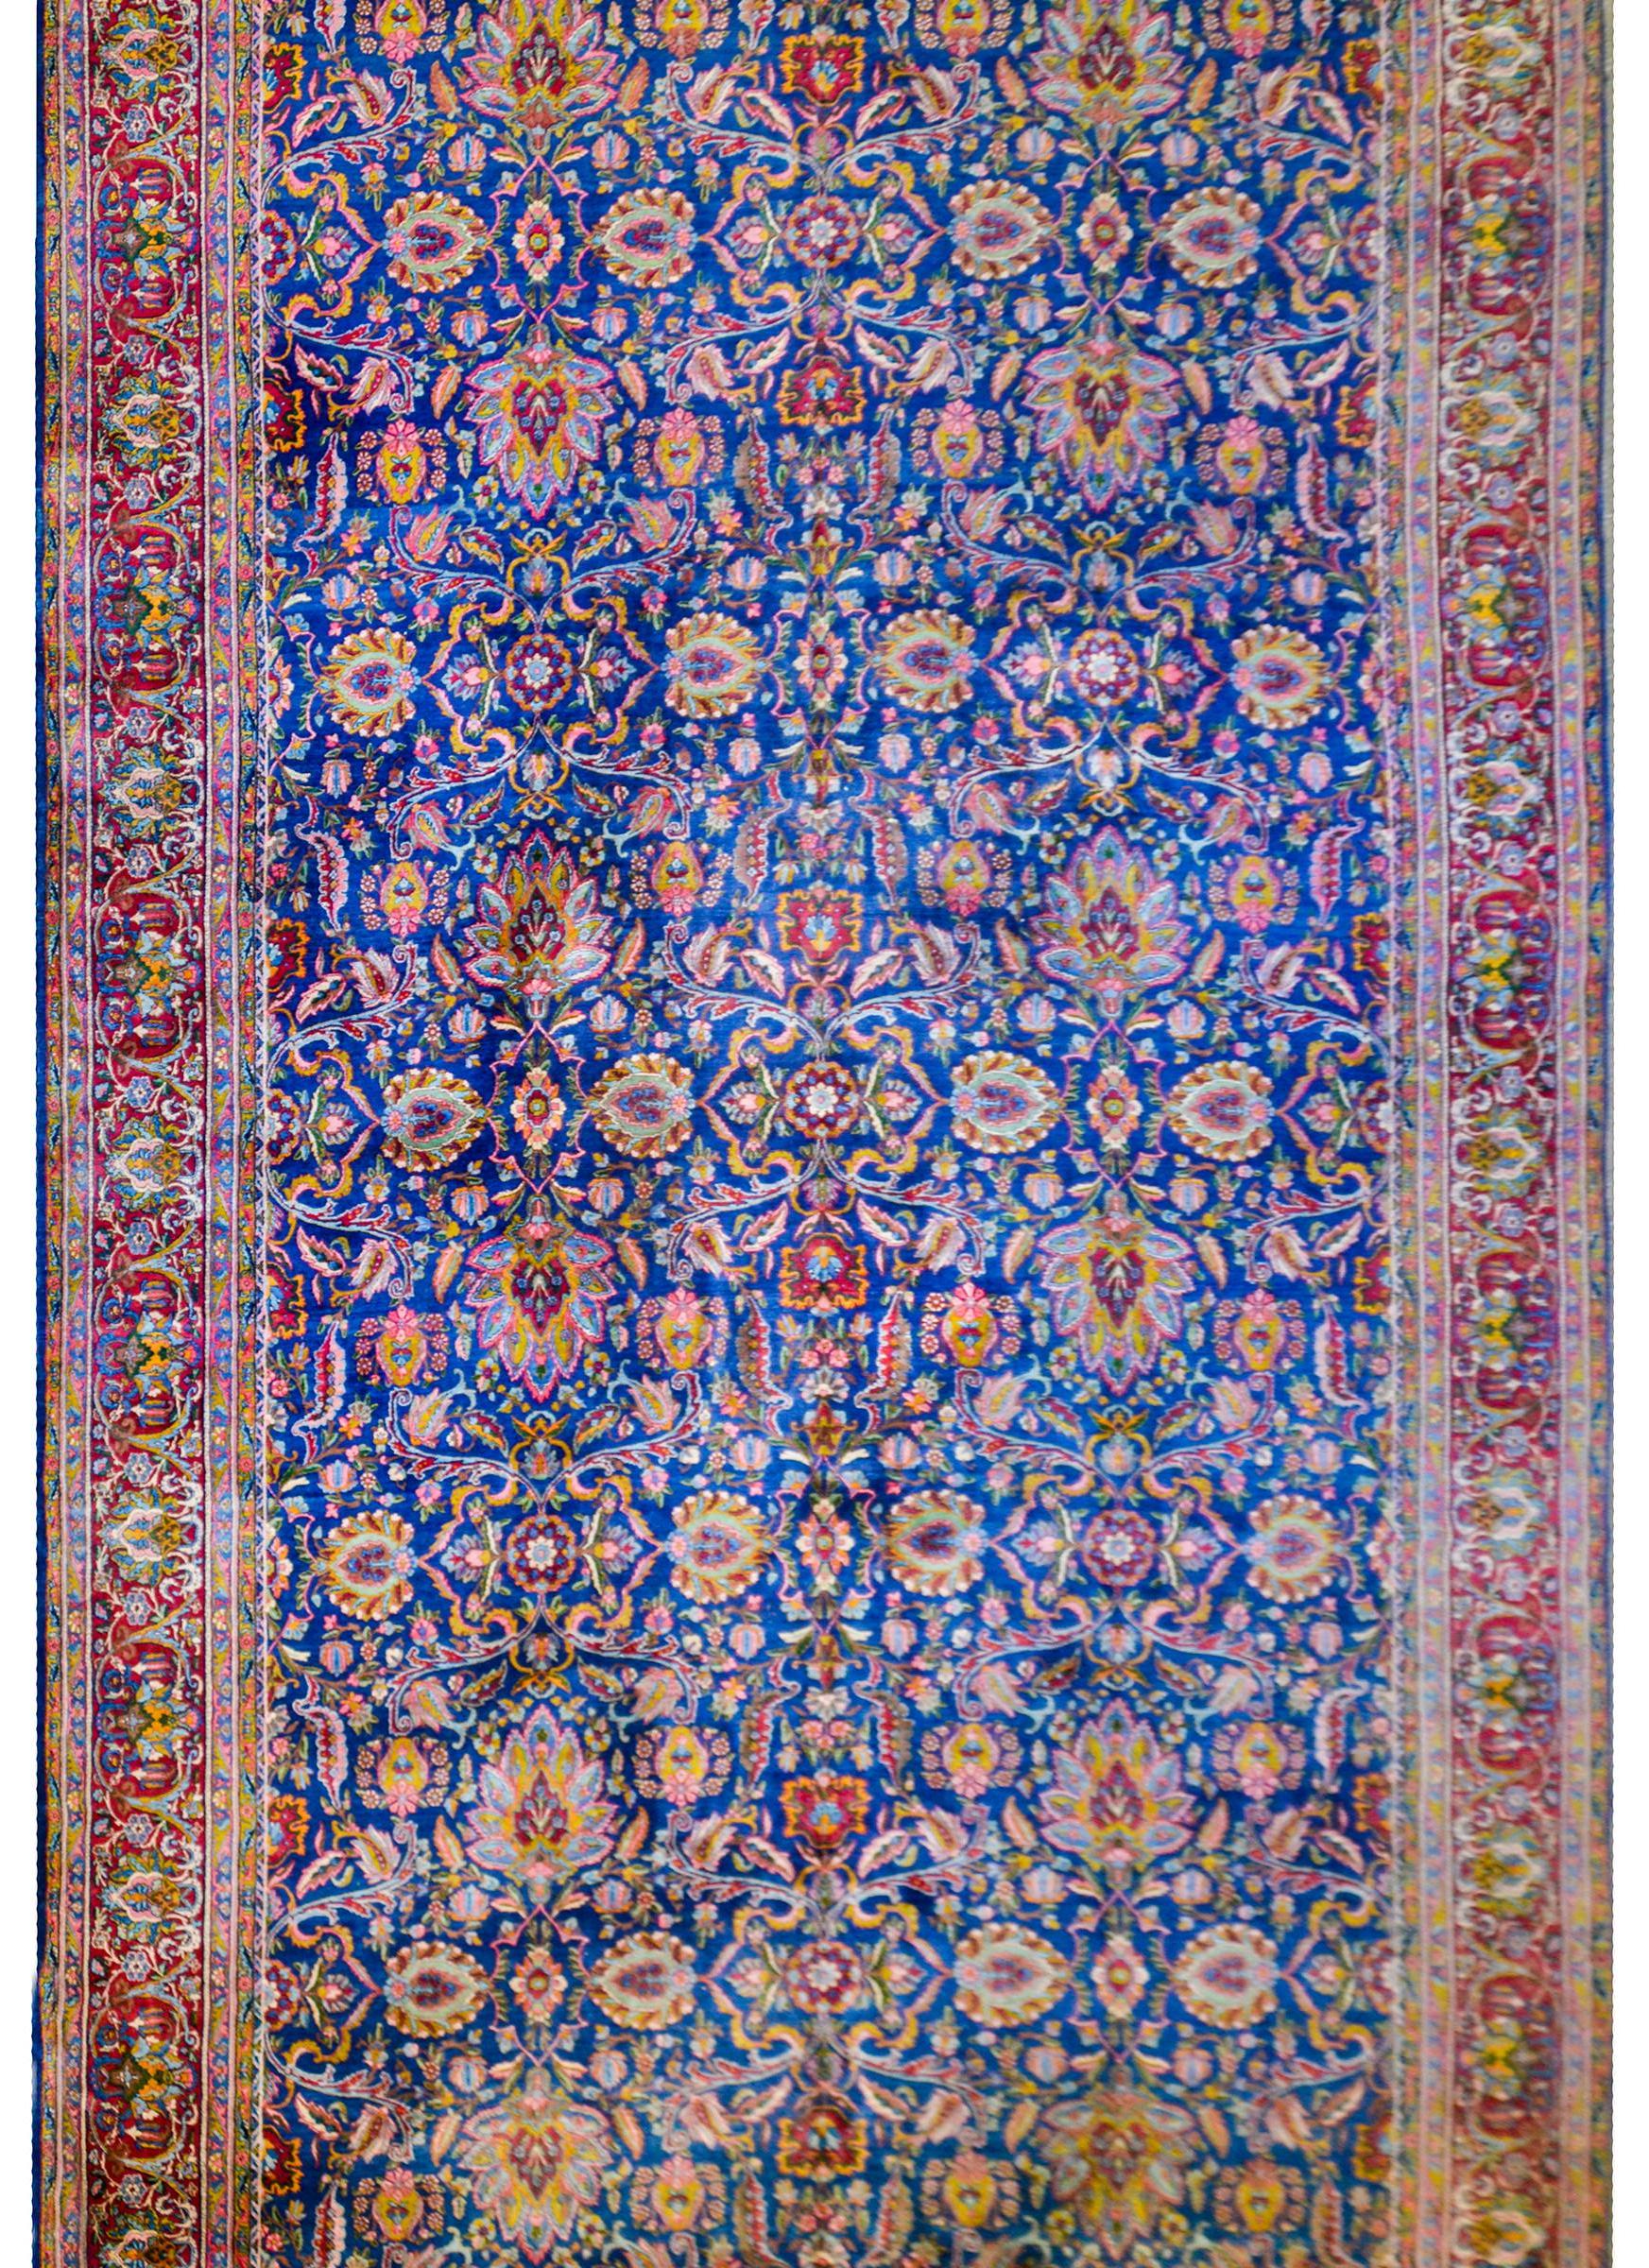 A magical early 20th century Persian Yadz rug with a wonderful densely woven pattern of large and small scale flowers, vines, and leaves rendered in myriad colors on a brilliant indigo background. The border is equally beautiful with a wide central